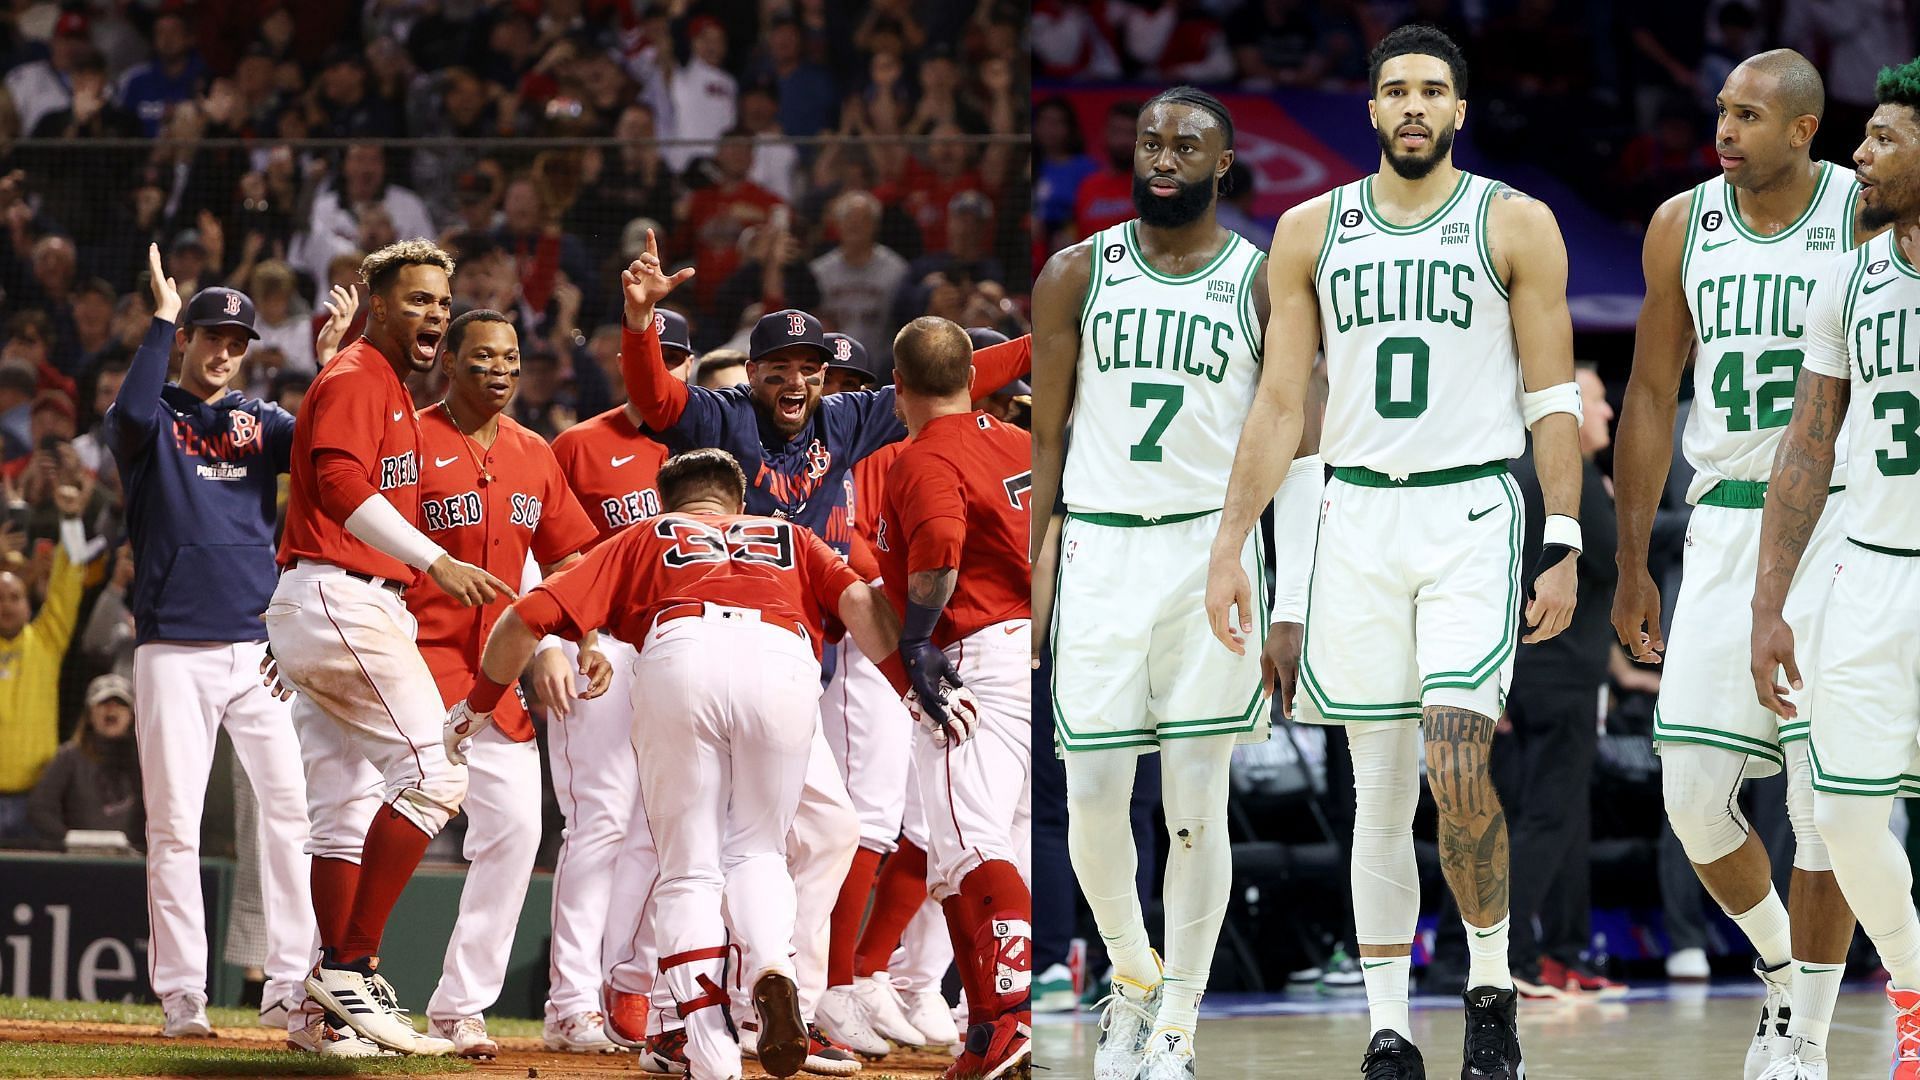 They're one win away from pulling this off - Boston Red Sox manager  compares Boston Celtics' Game 7 to 2004 MLB playoffs